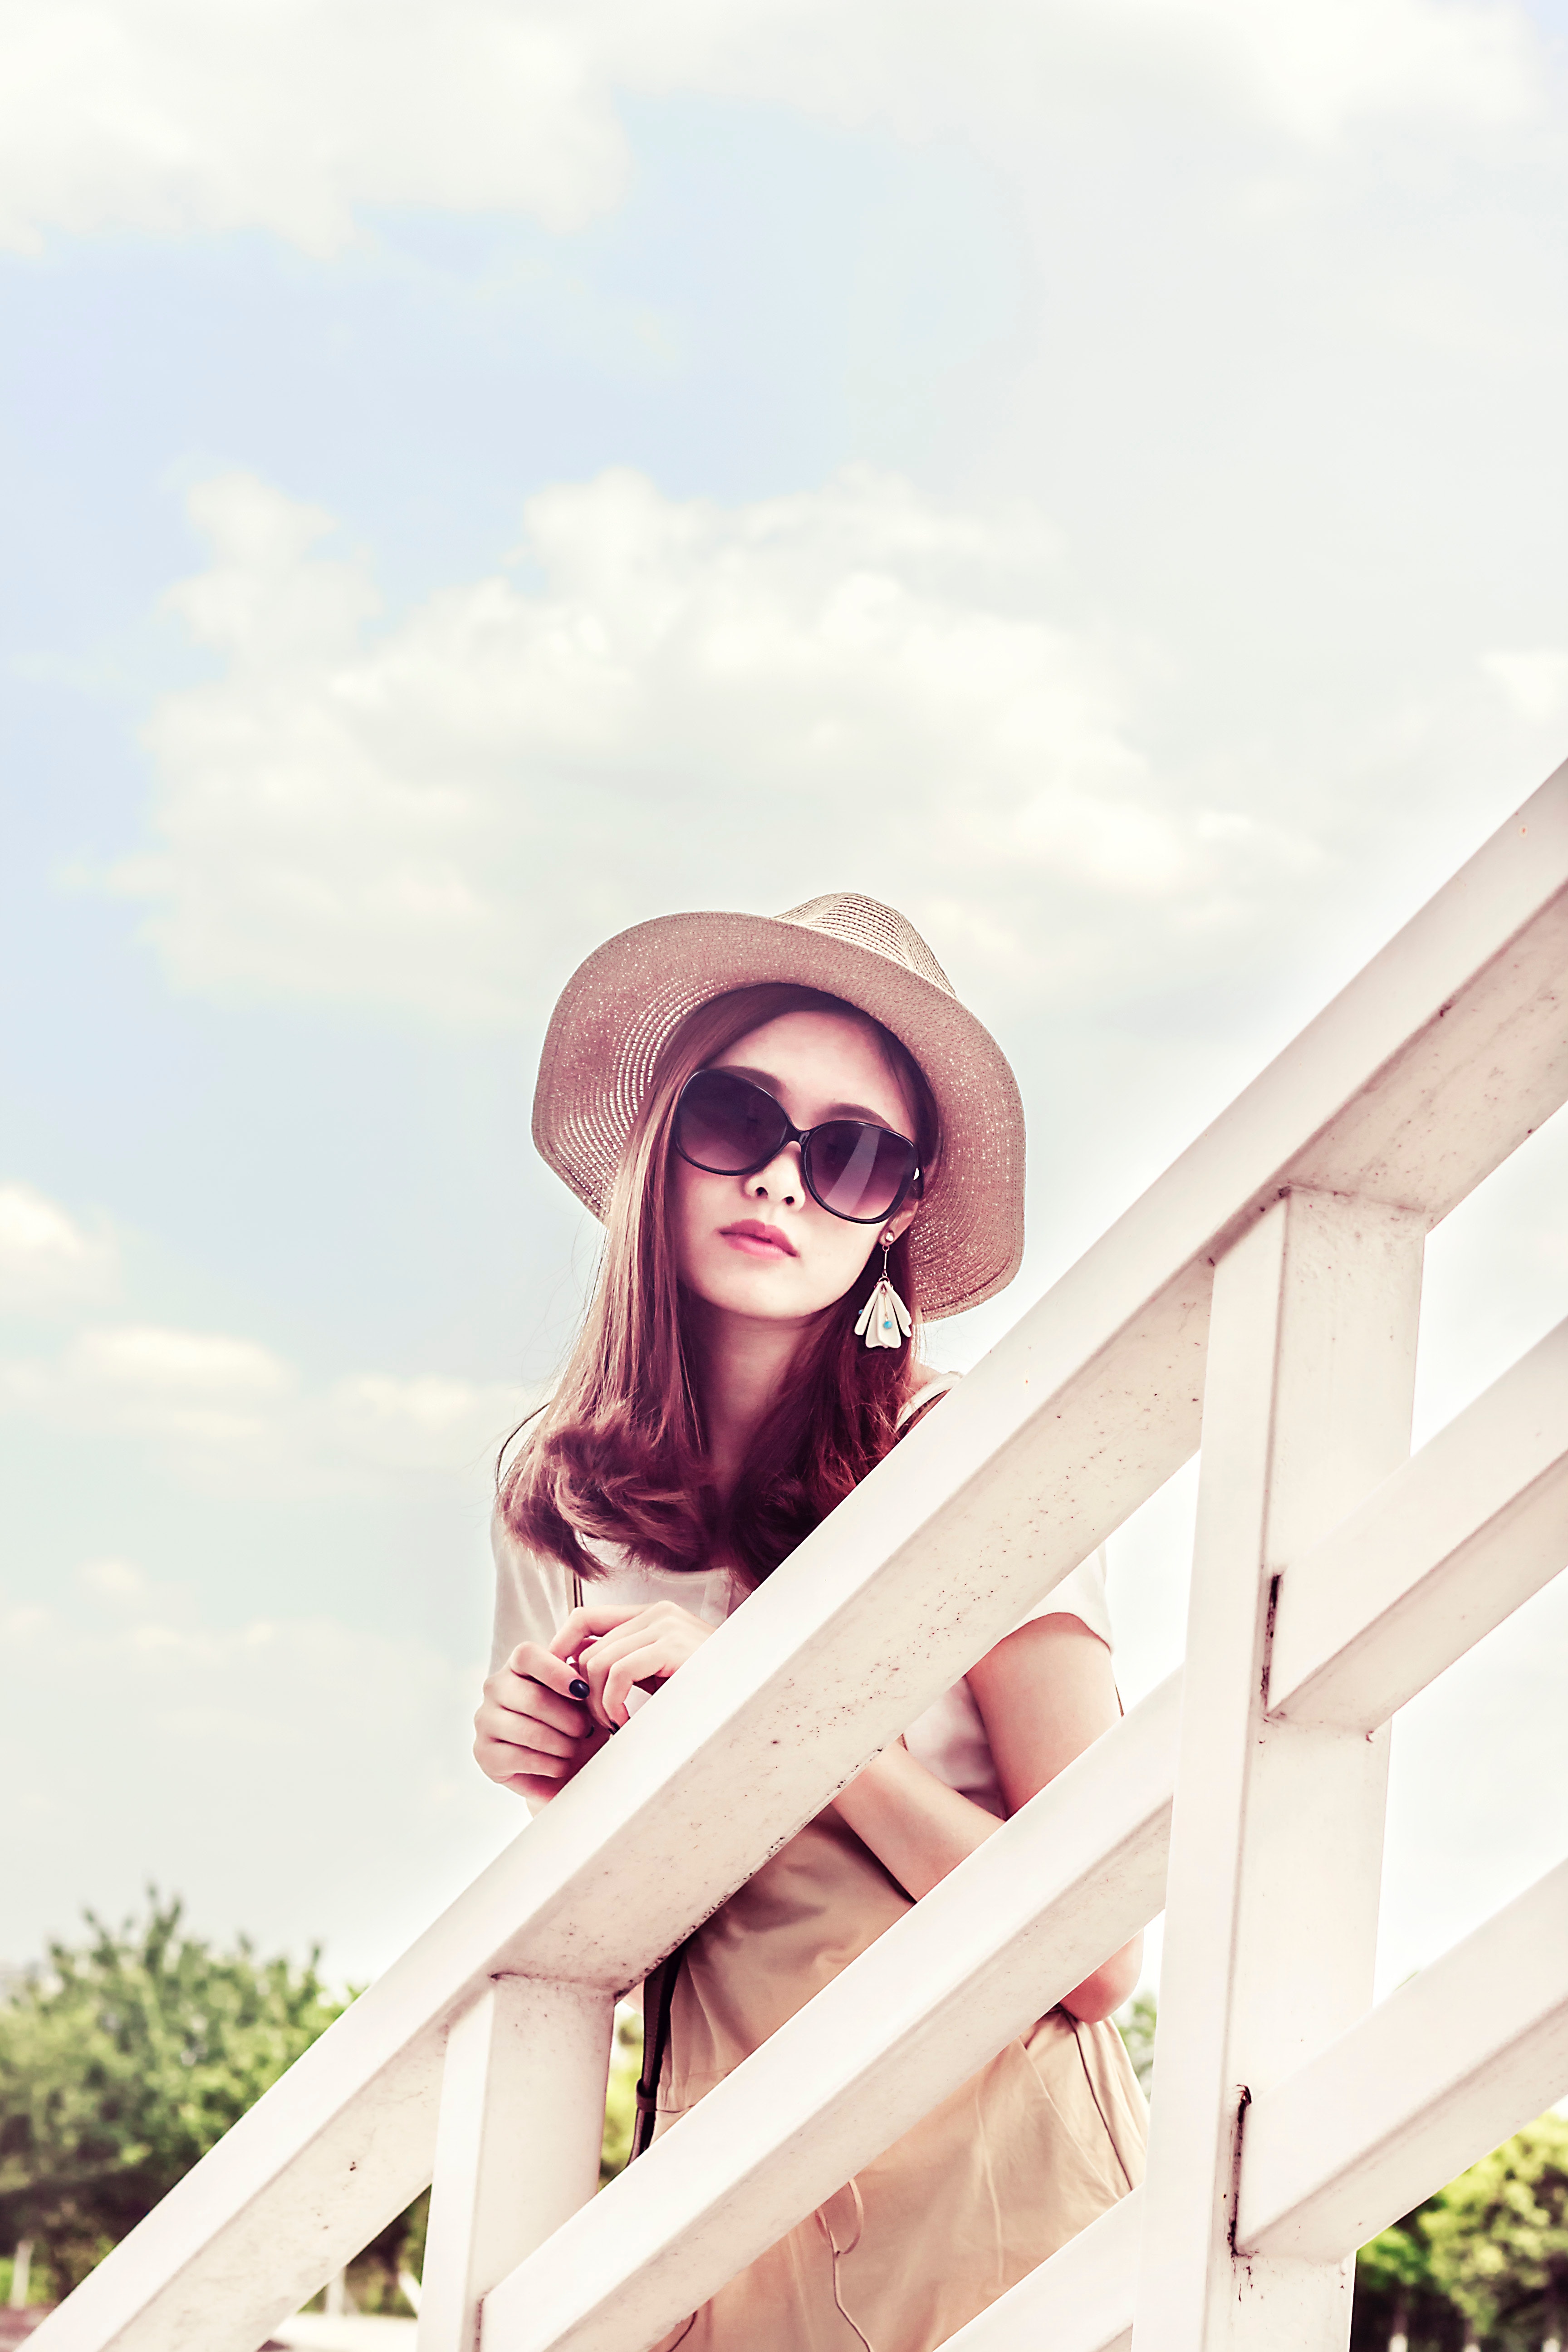 Woman wearing gray sun hat in front of white fence photo